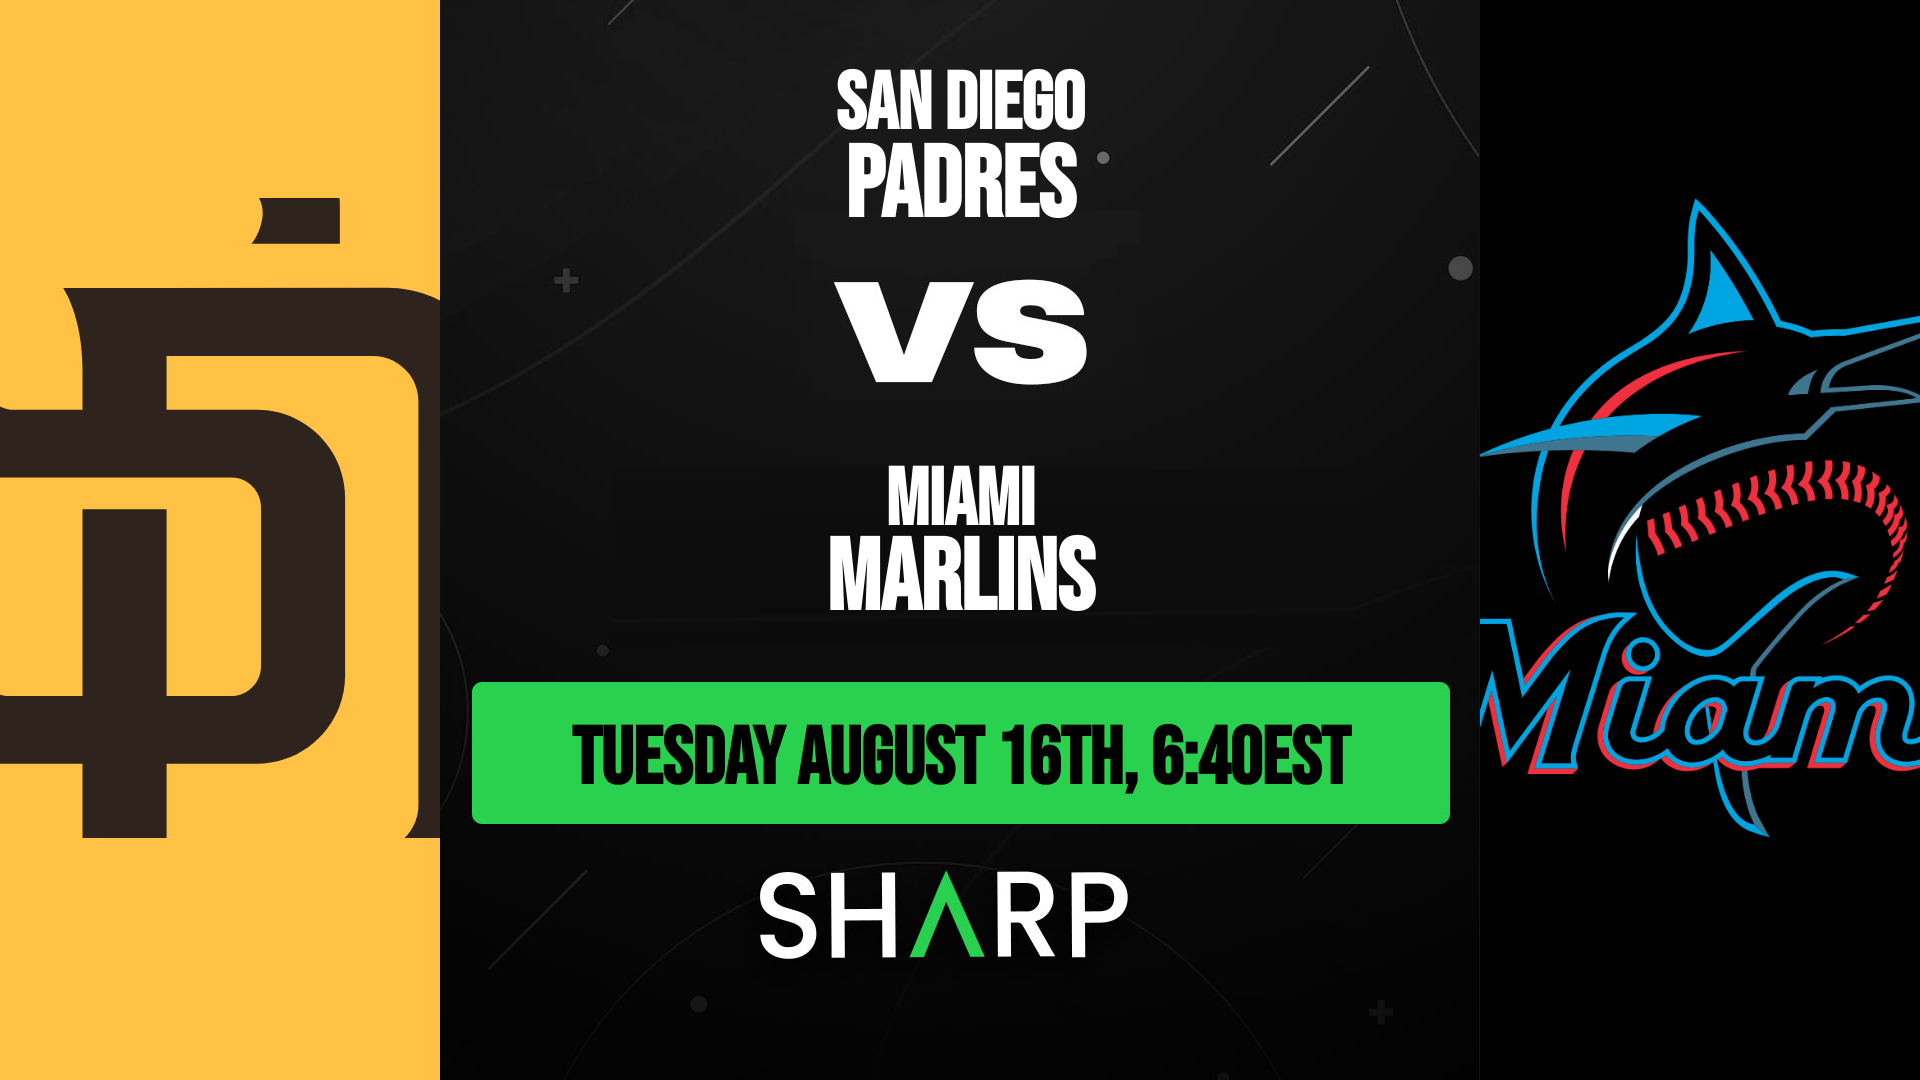 San Diego Padres @ Miami Marlins Matchup Preview - August 16th, 2022